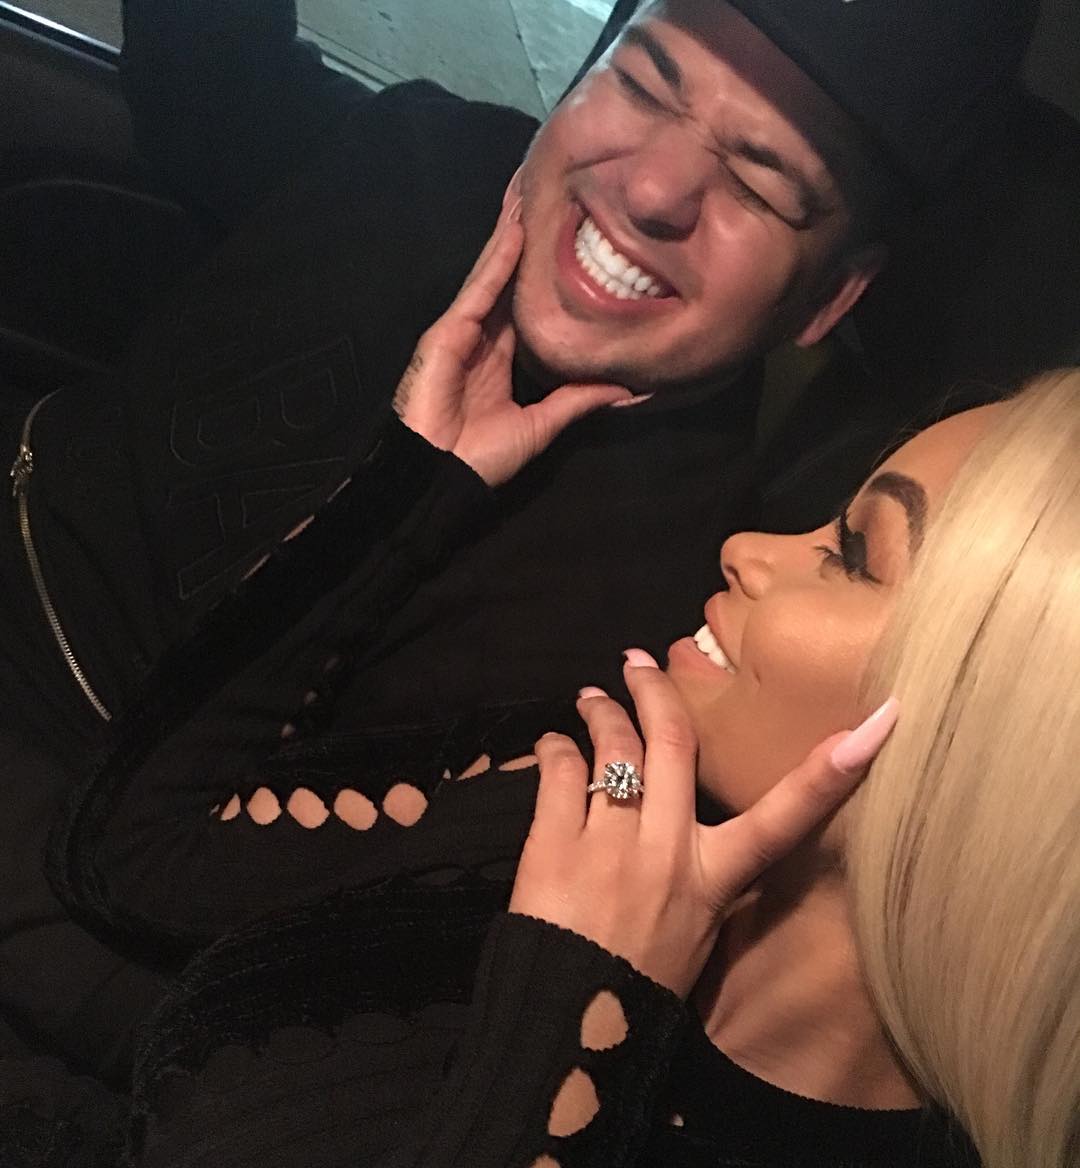 Rob Kardashian and Blac Chyna to wed ‘later this year’